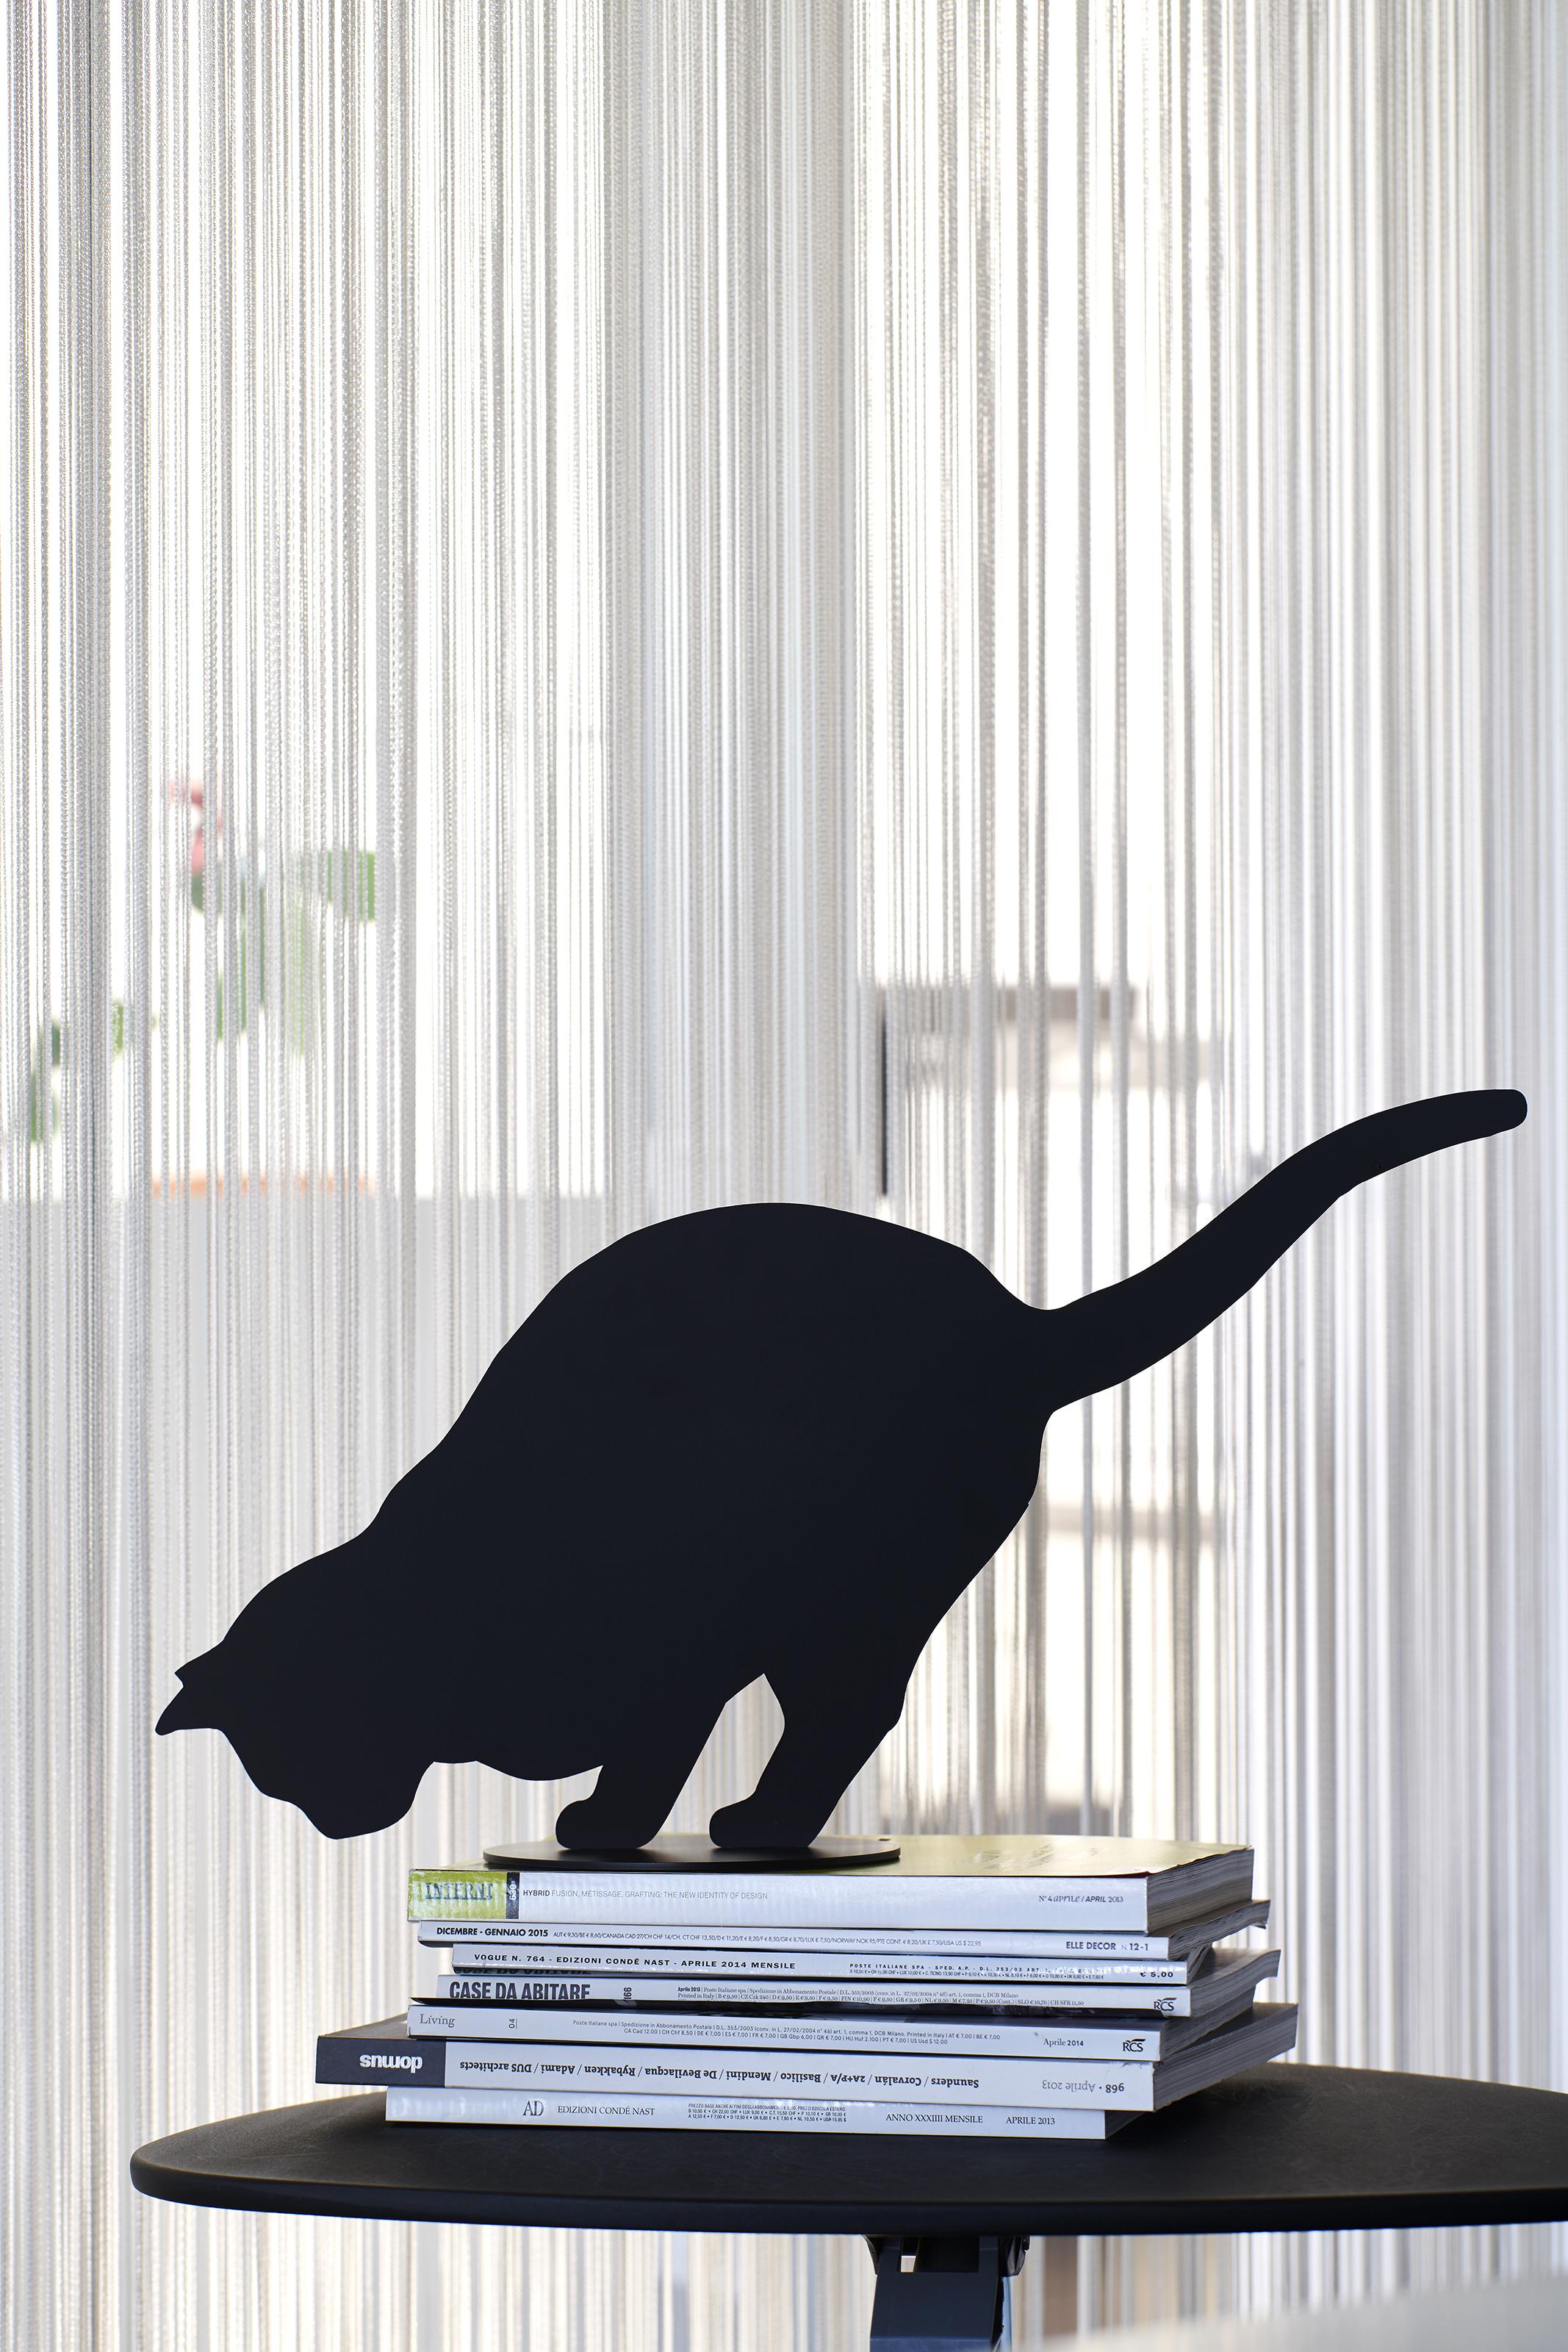 Ombres de Chats by Angelo Barcella are poetic objects, delicate table sculptures. Shadows of curious, busy, sore, angry or bored cats, instants which are made eternal when transformed into some very special steel furnishing accessory. The Ombres de